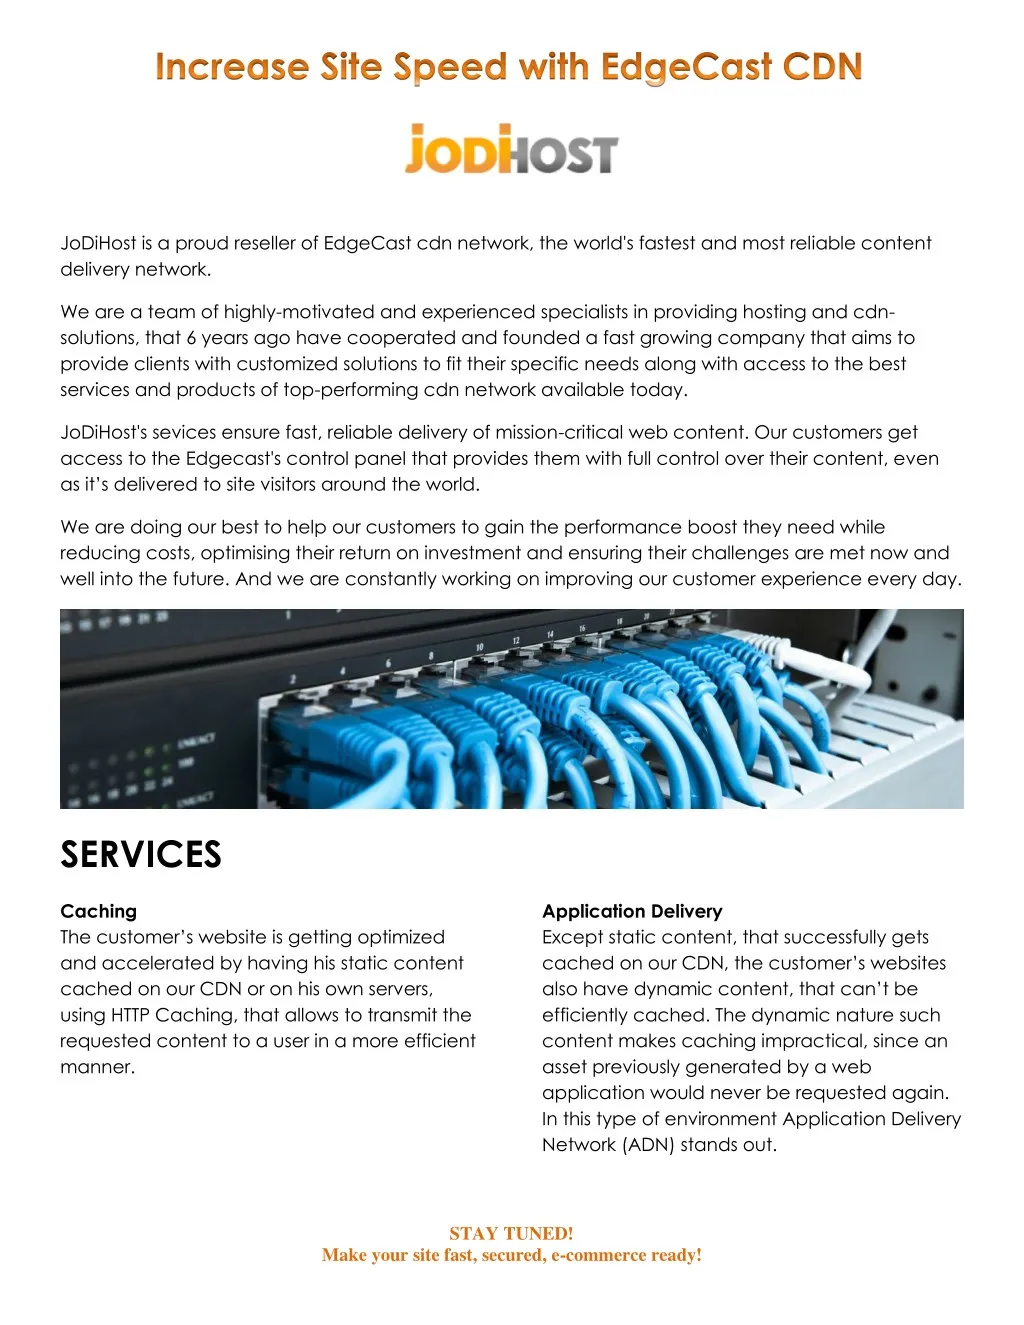 jodihost is a proud reseller of edgecast